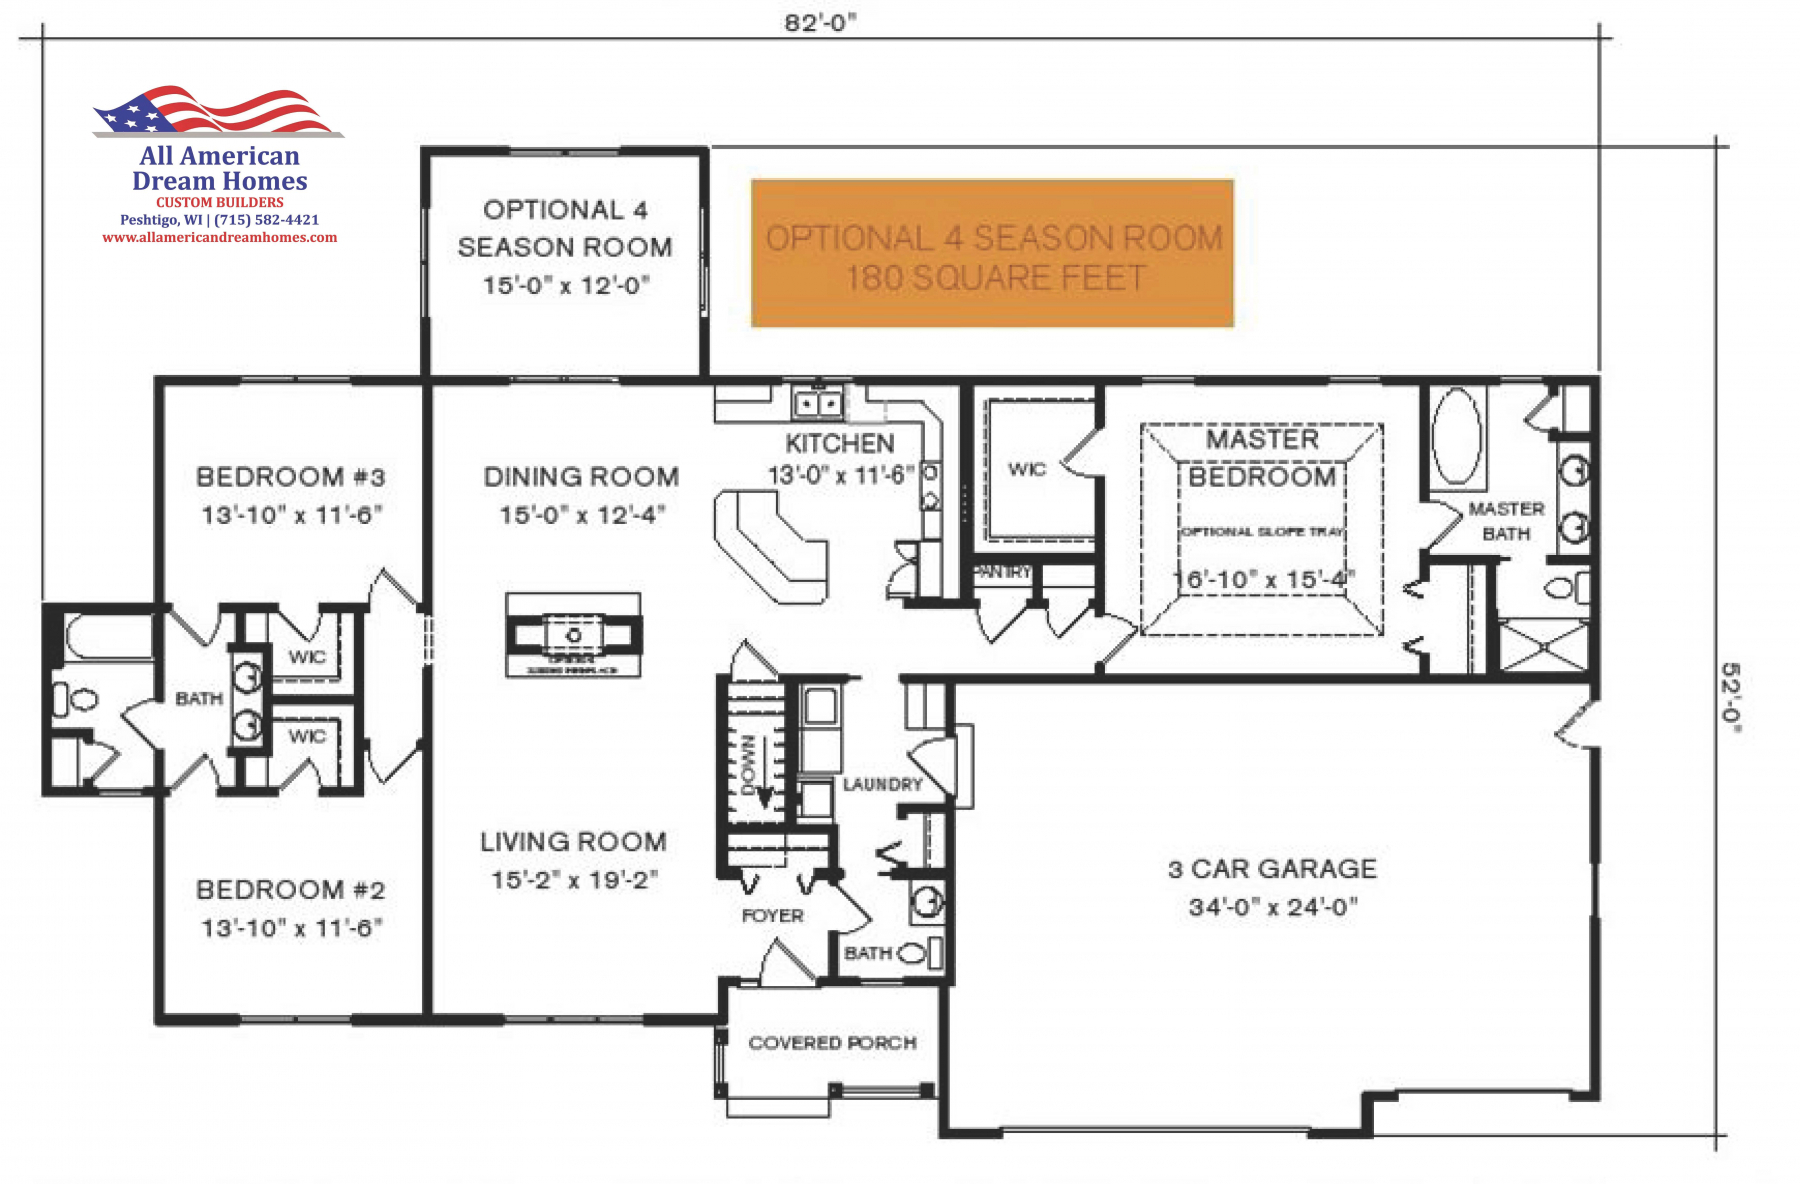 AAA-SINGLE-STORY-RANCH-140-WHITTEMORE-FLOORPLAN-2210-SQ-FT